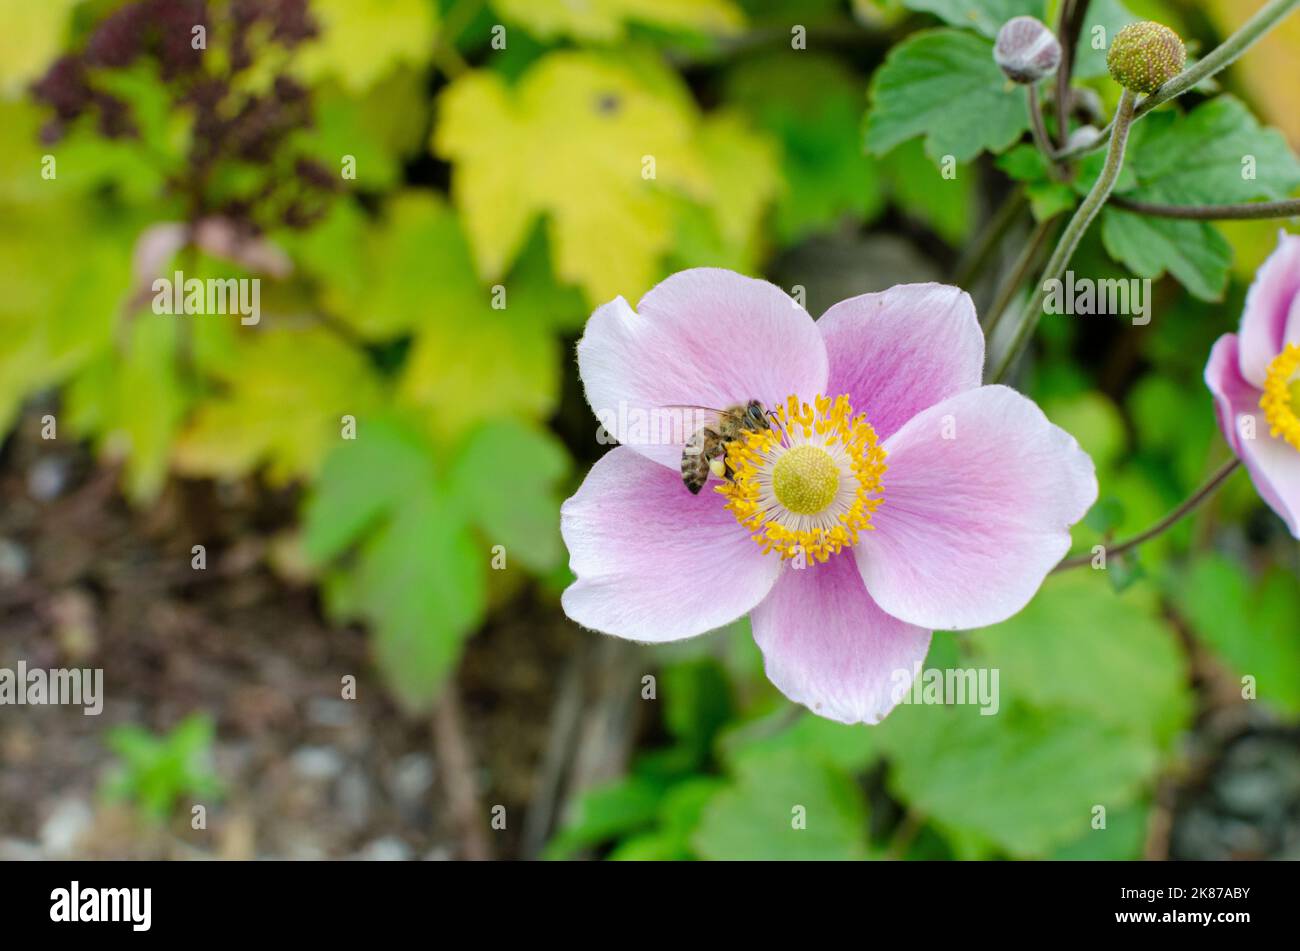 Anemone hupehensis 'september charm' in autumn in botany, Poland, Europe. Stock Photo